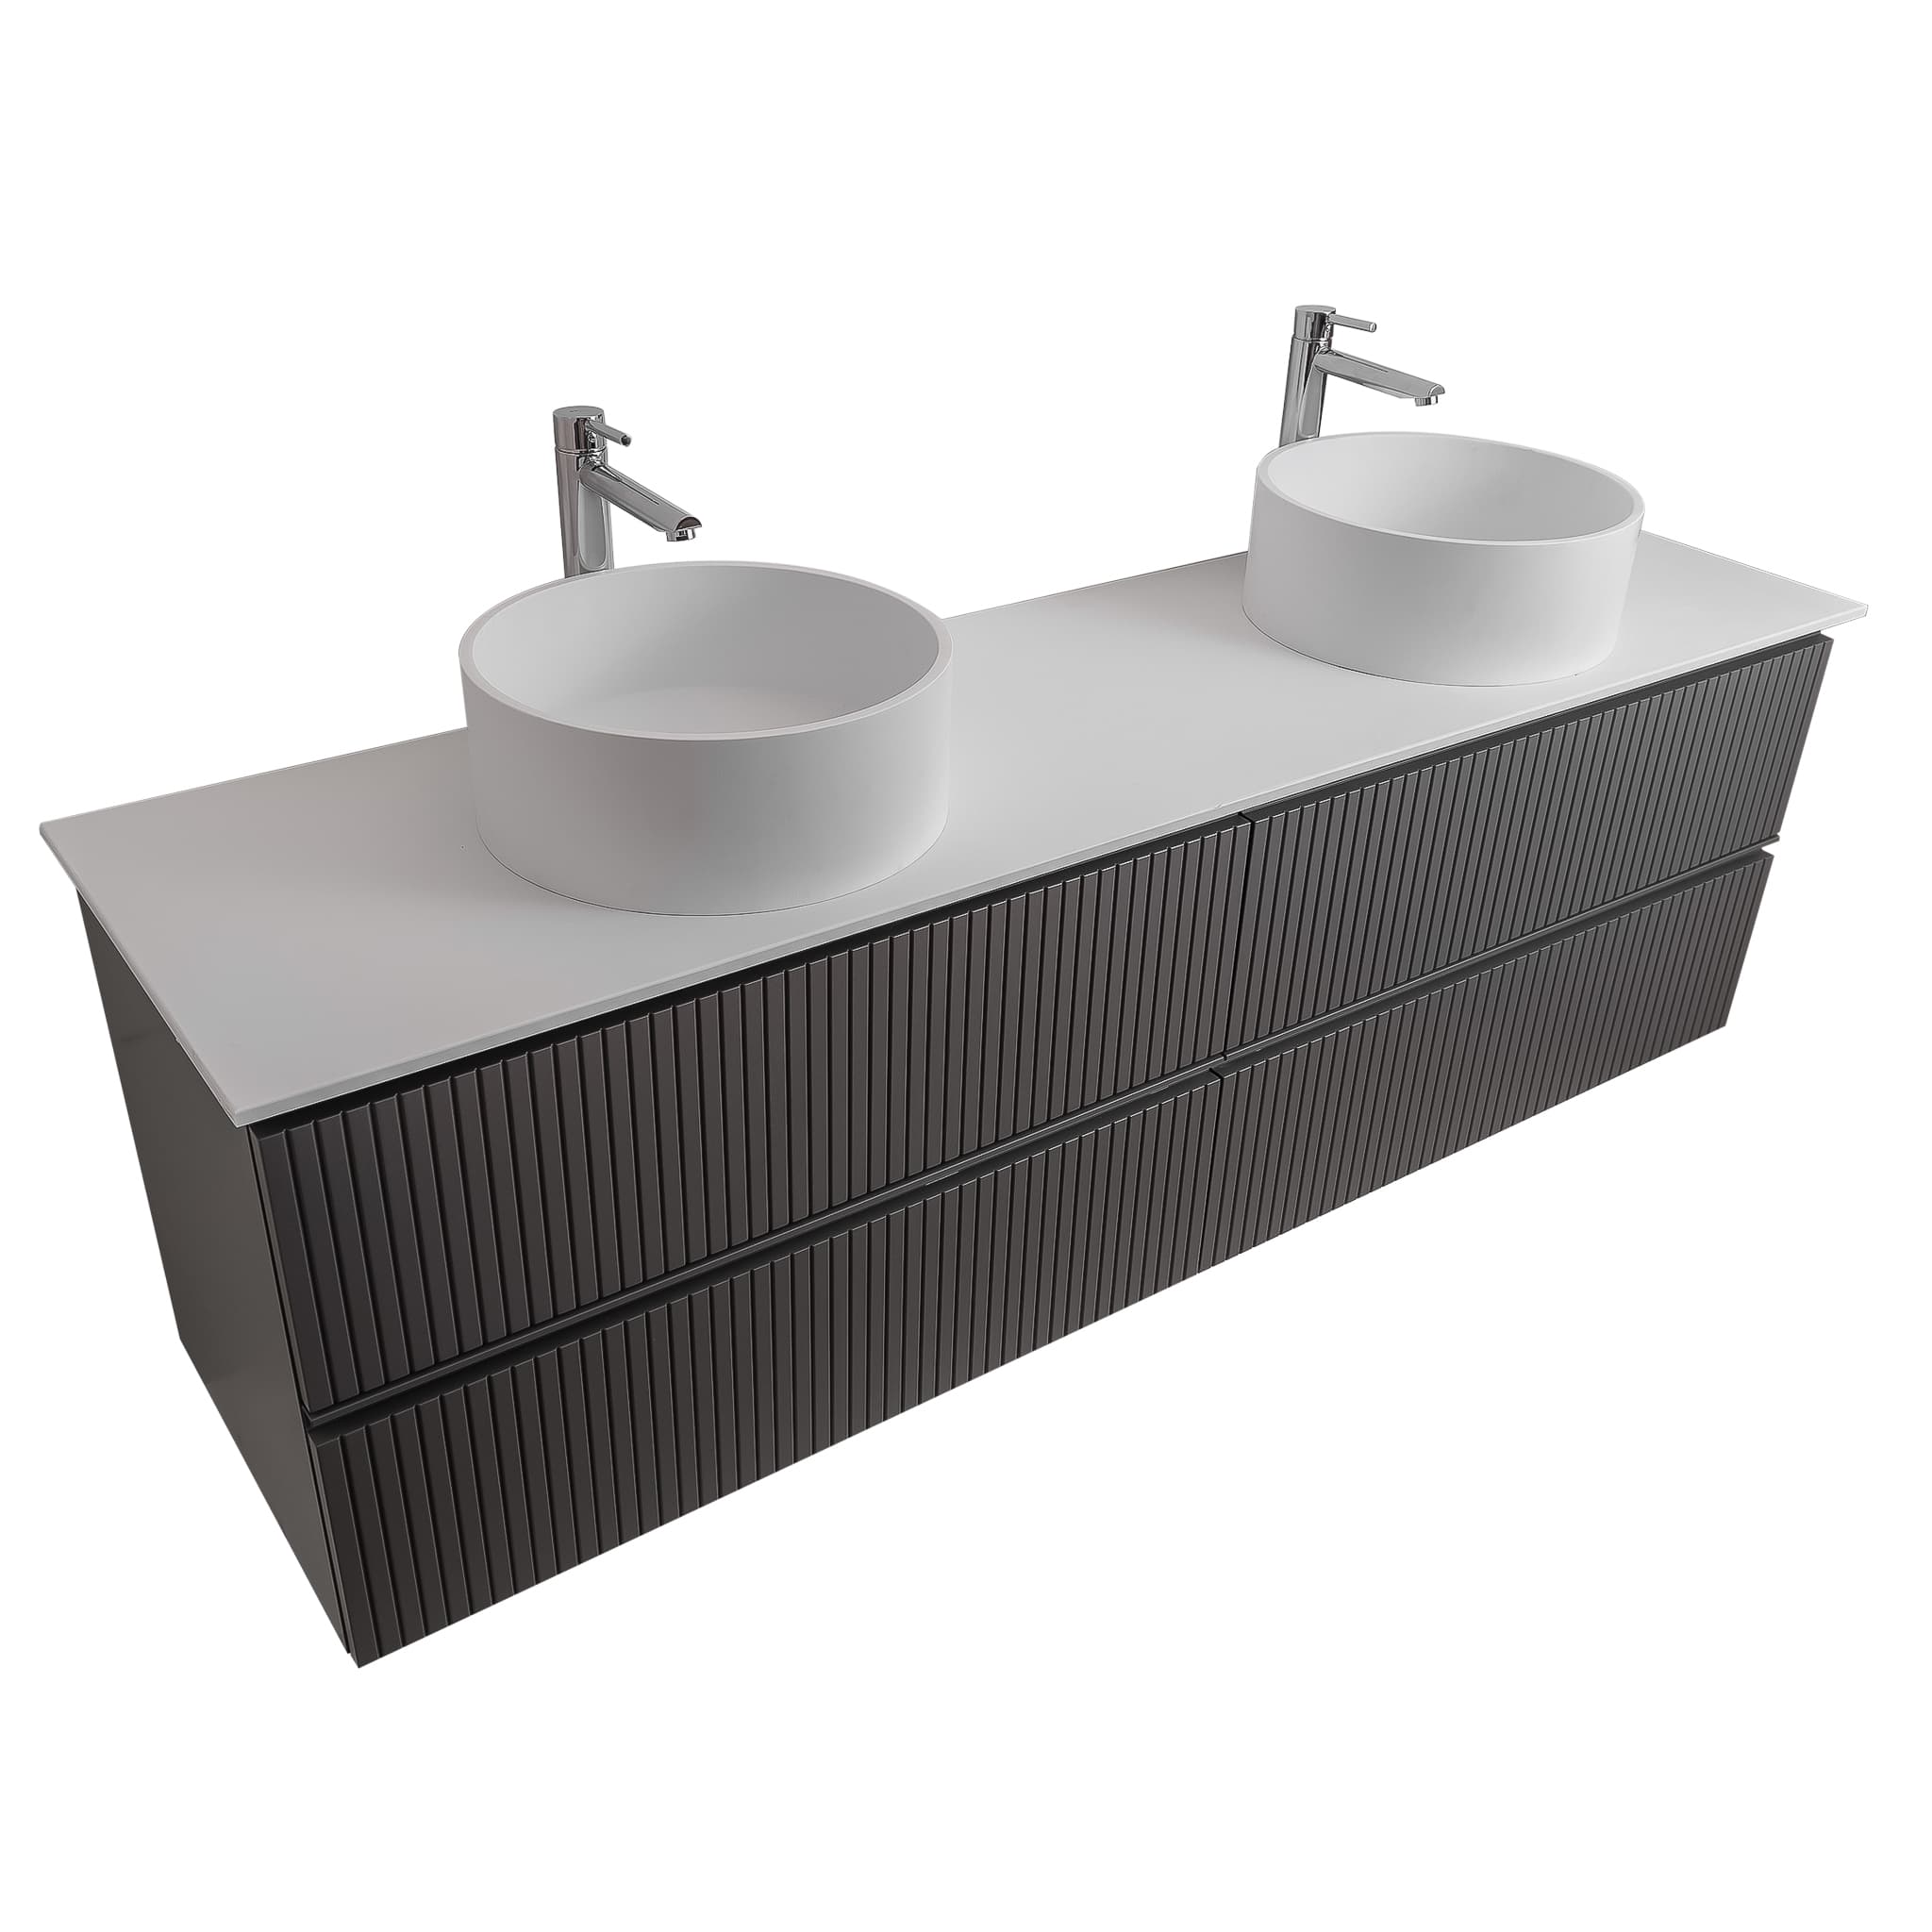 Ares 63 Matte Grey Cabinet, Solid Surface Flat White Counter And Two Round Solid Surface White Basin 1386, Wall Mounted Modern Vanity Set